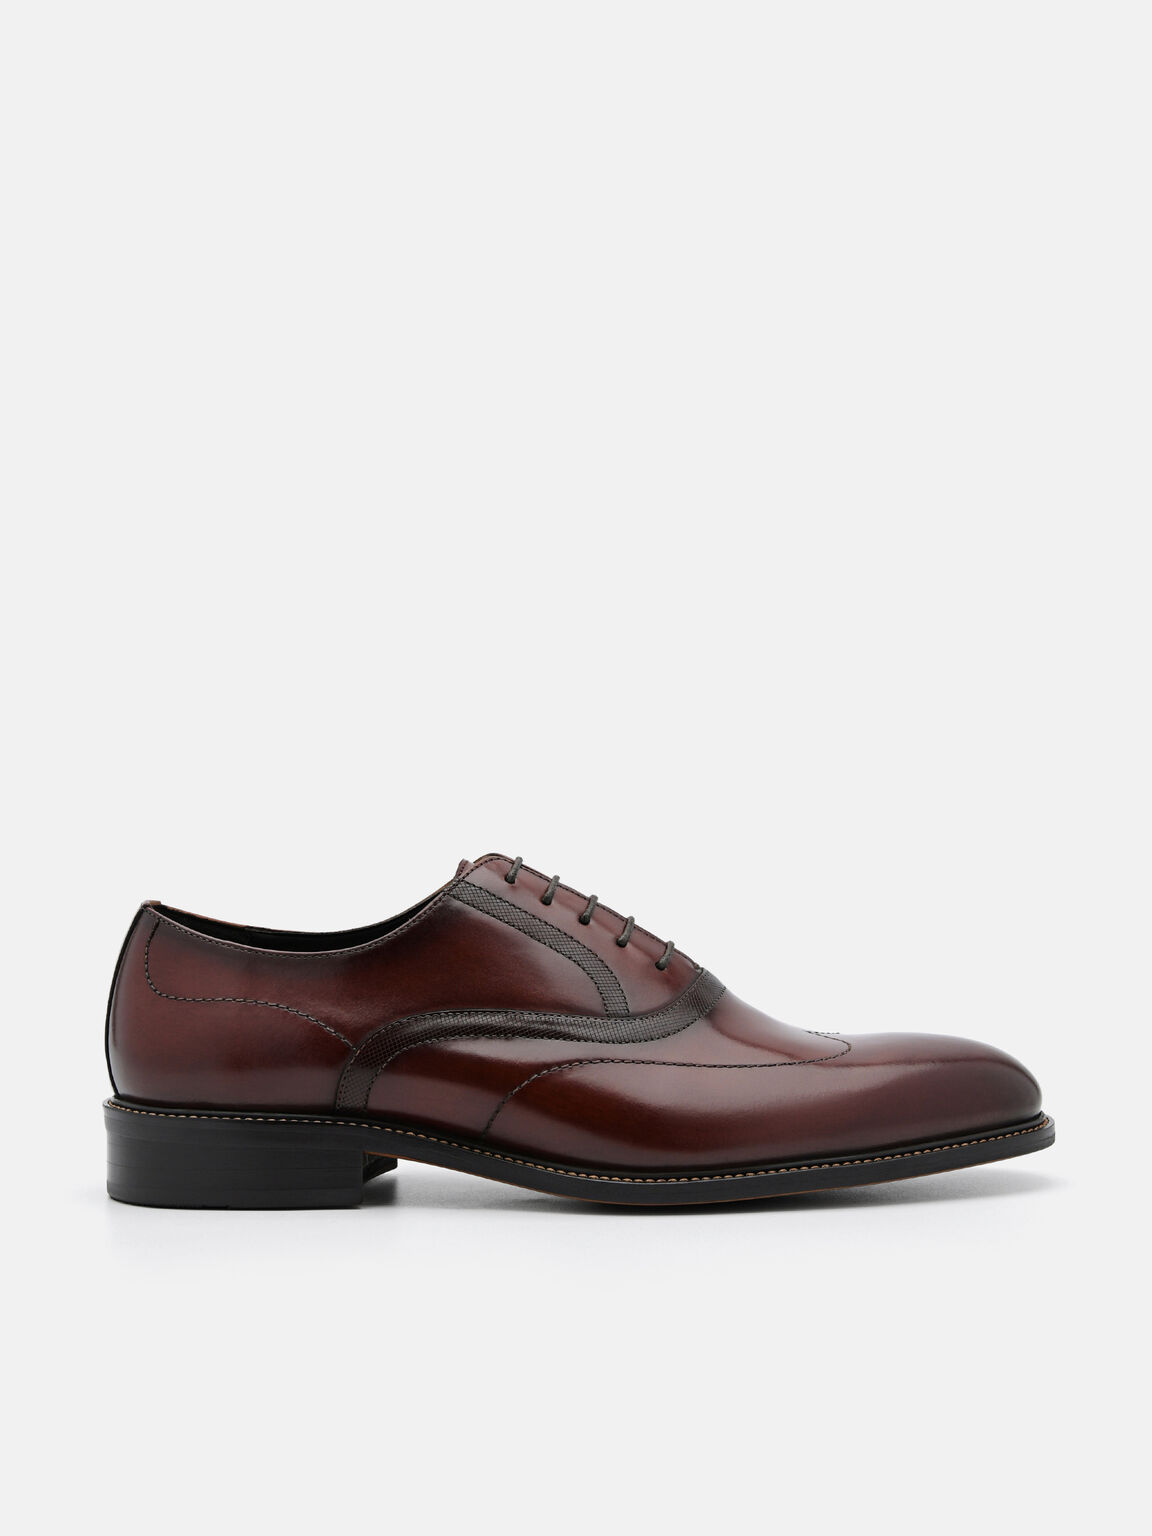 Leather Wingtip Oxford Shoes, Brown